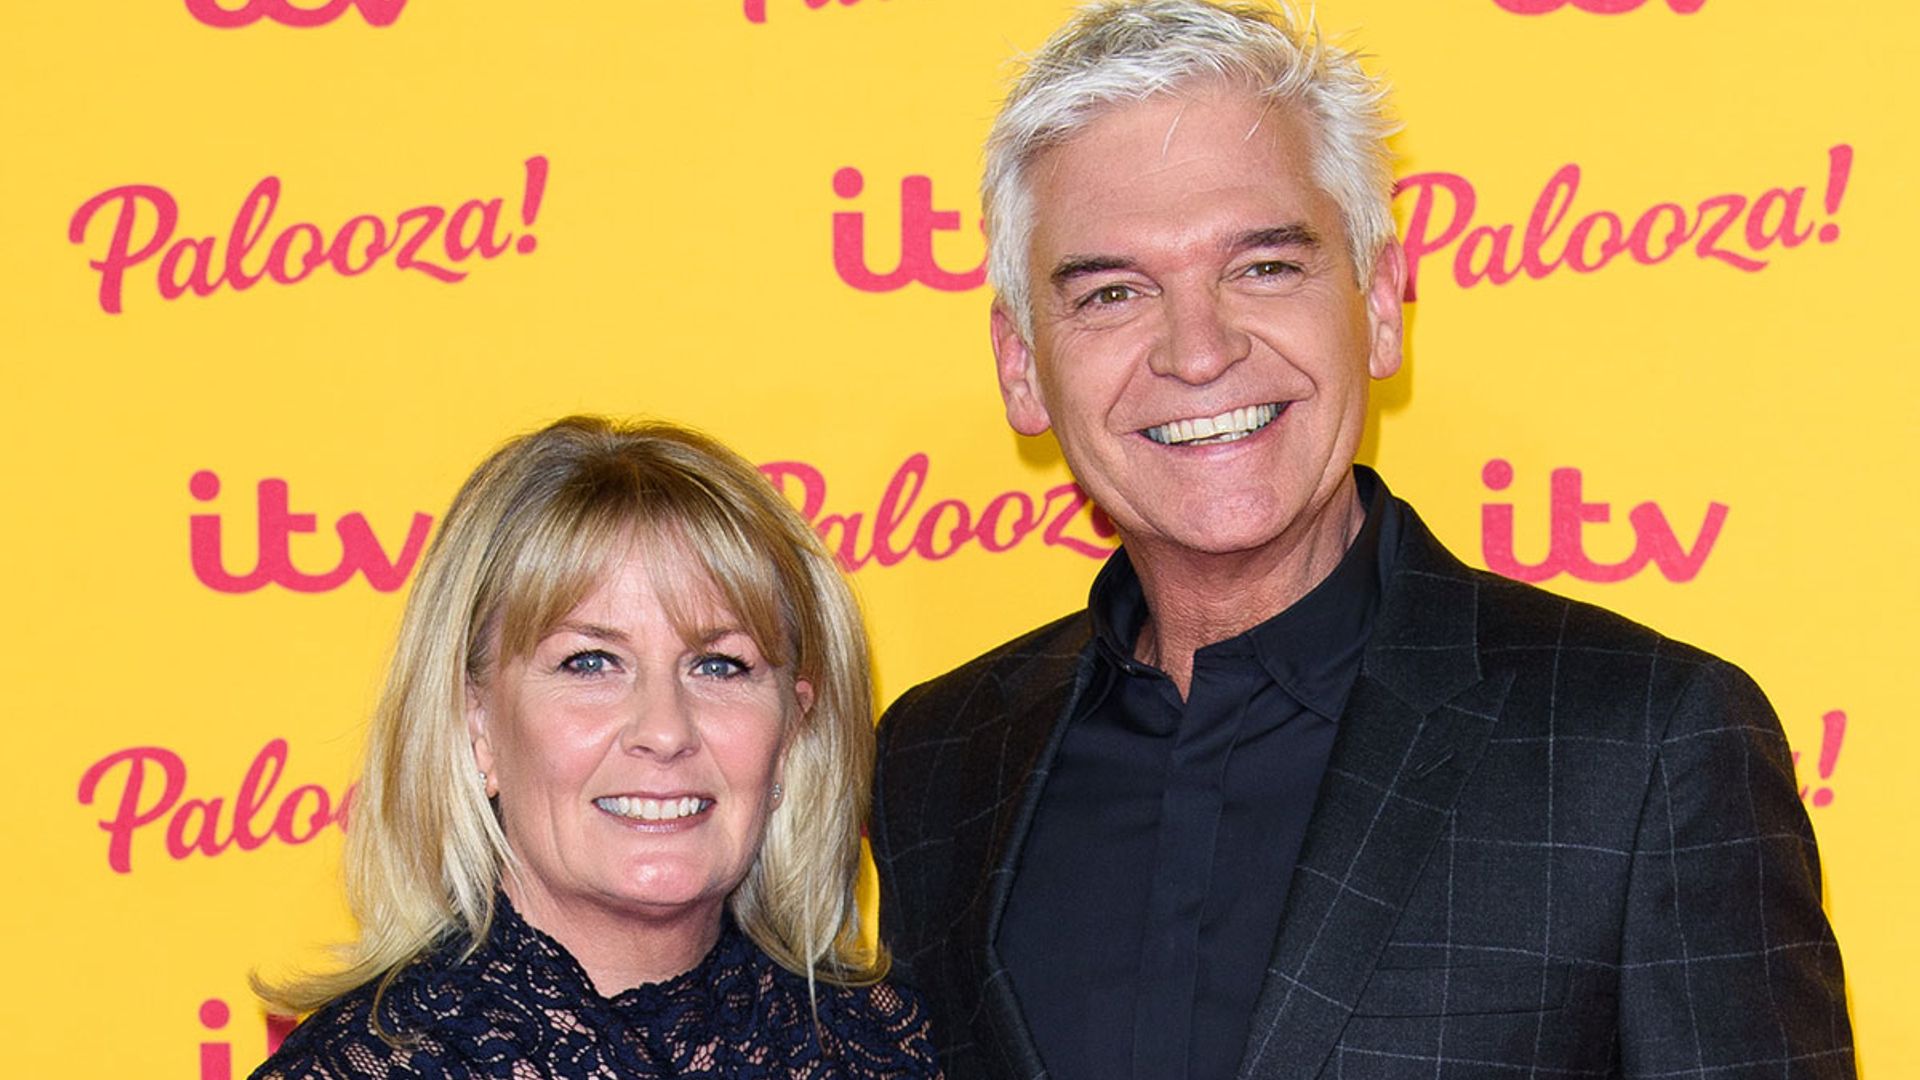 Phillip Schofield with his wife Steph